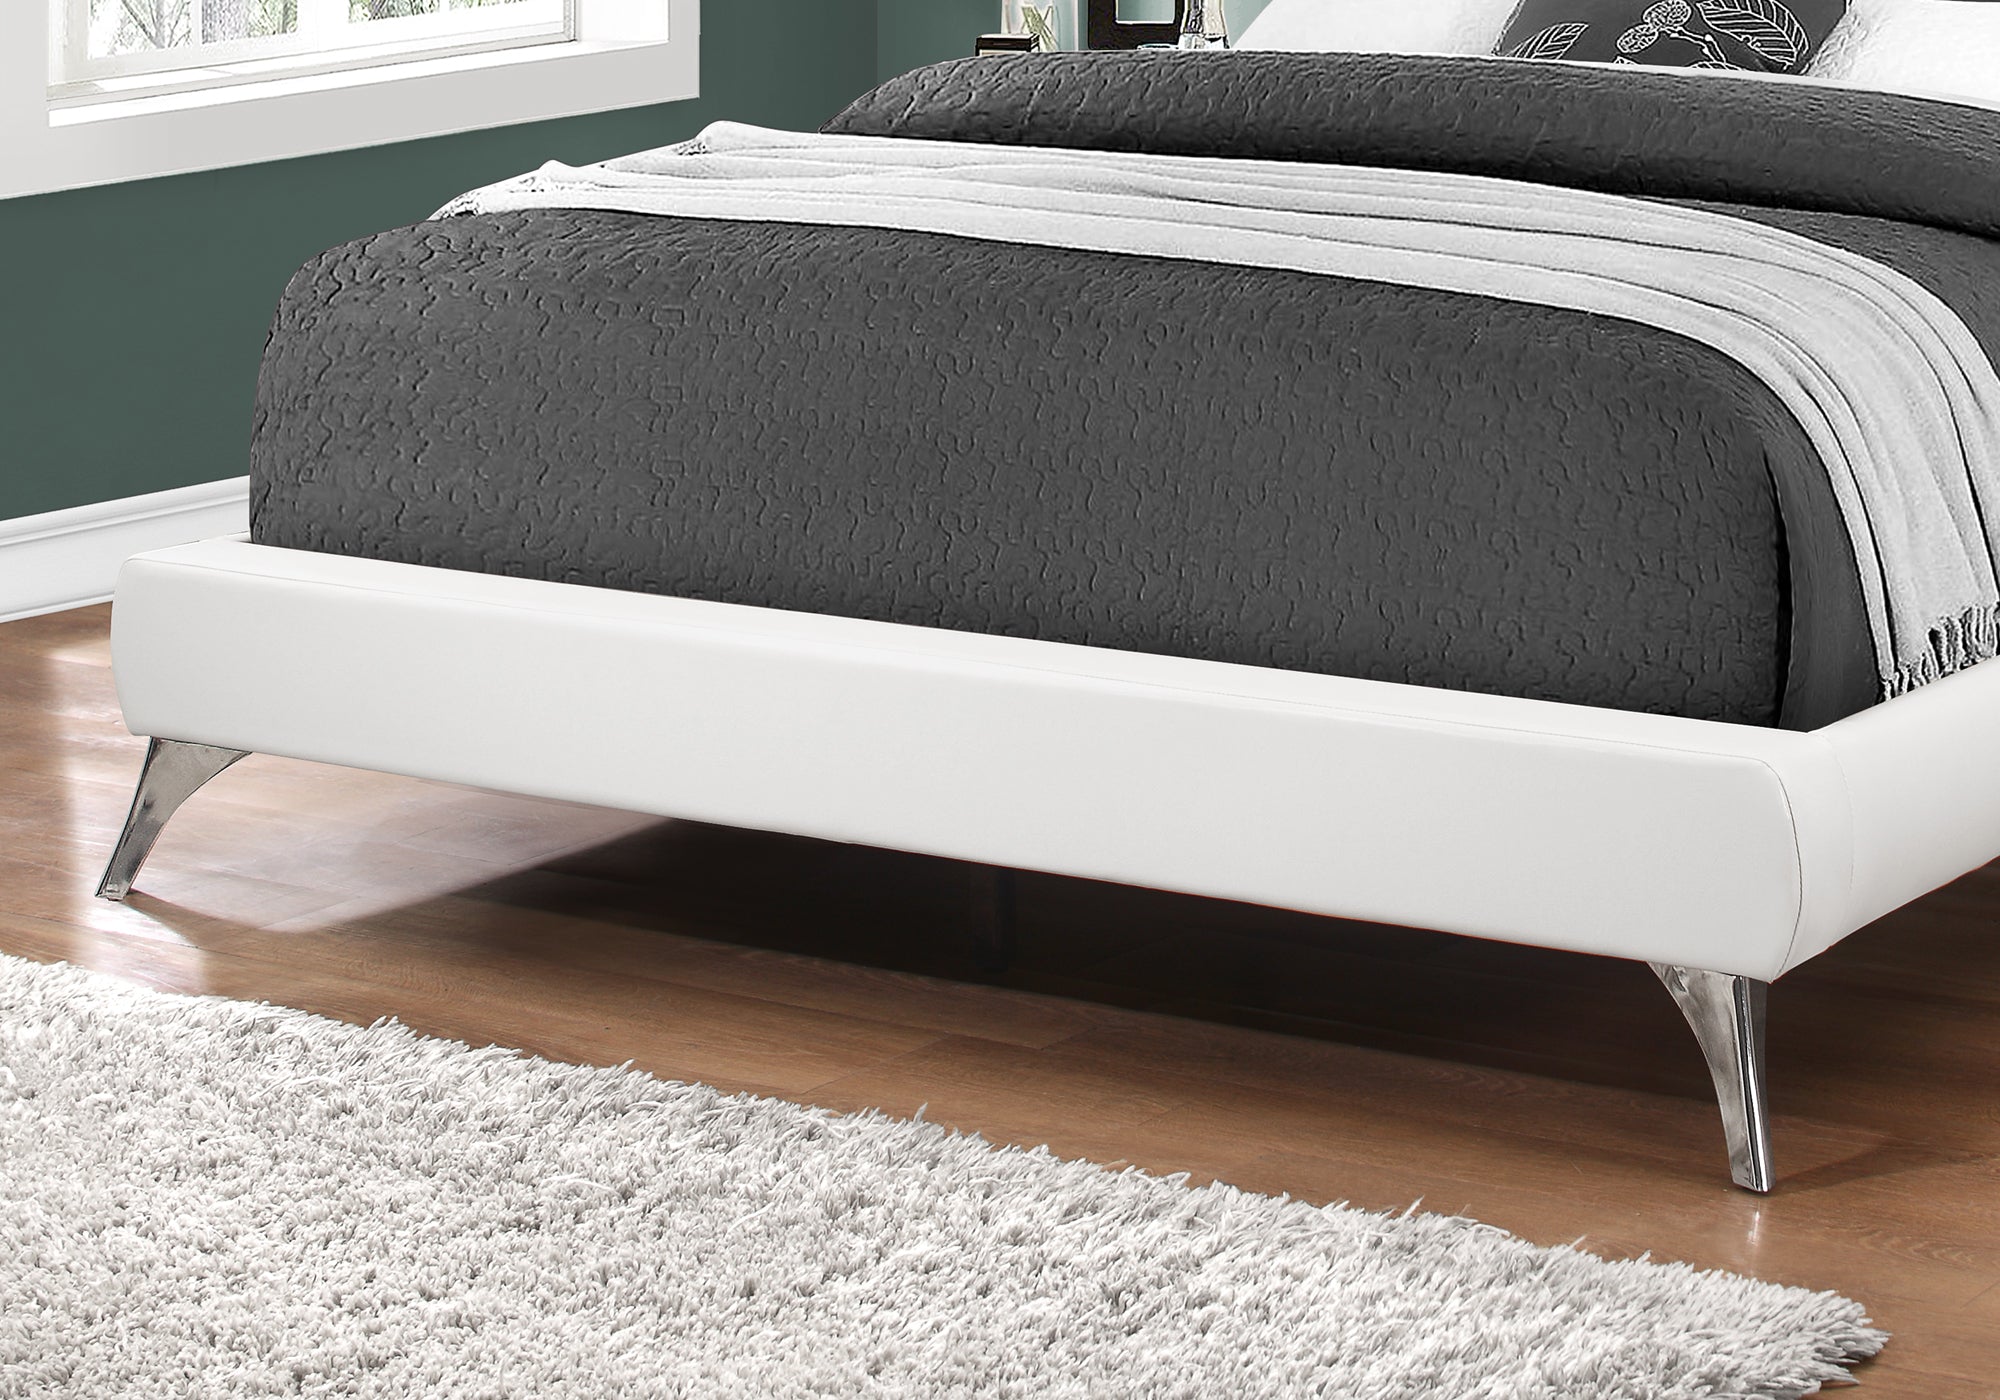 Bed - Queen Size / White Leather-Look With Chrome Legs